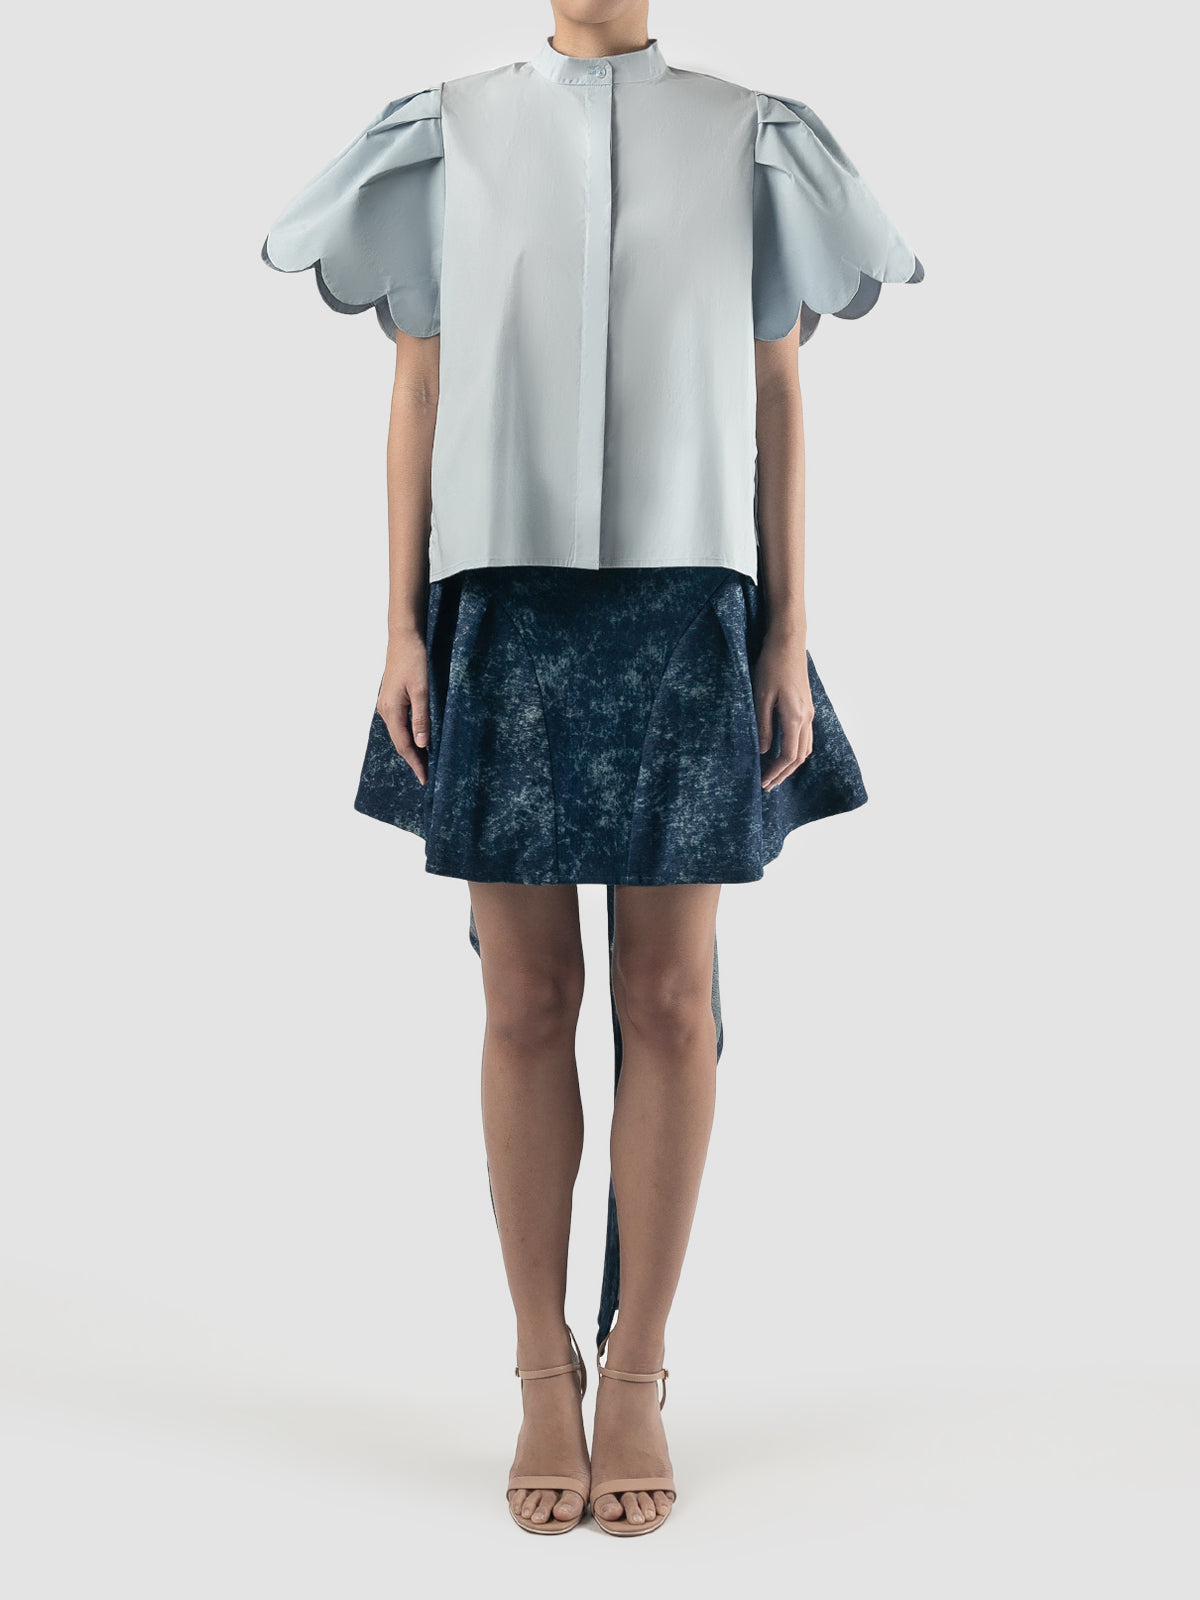 Sky blue Biennis shirt with scalloped short sleeves